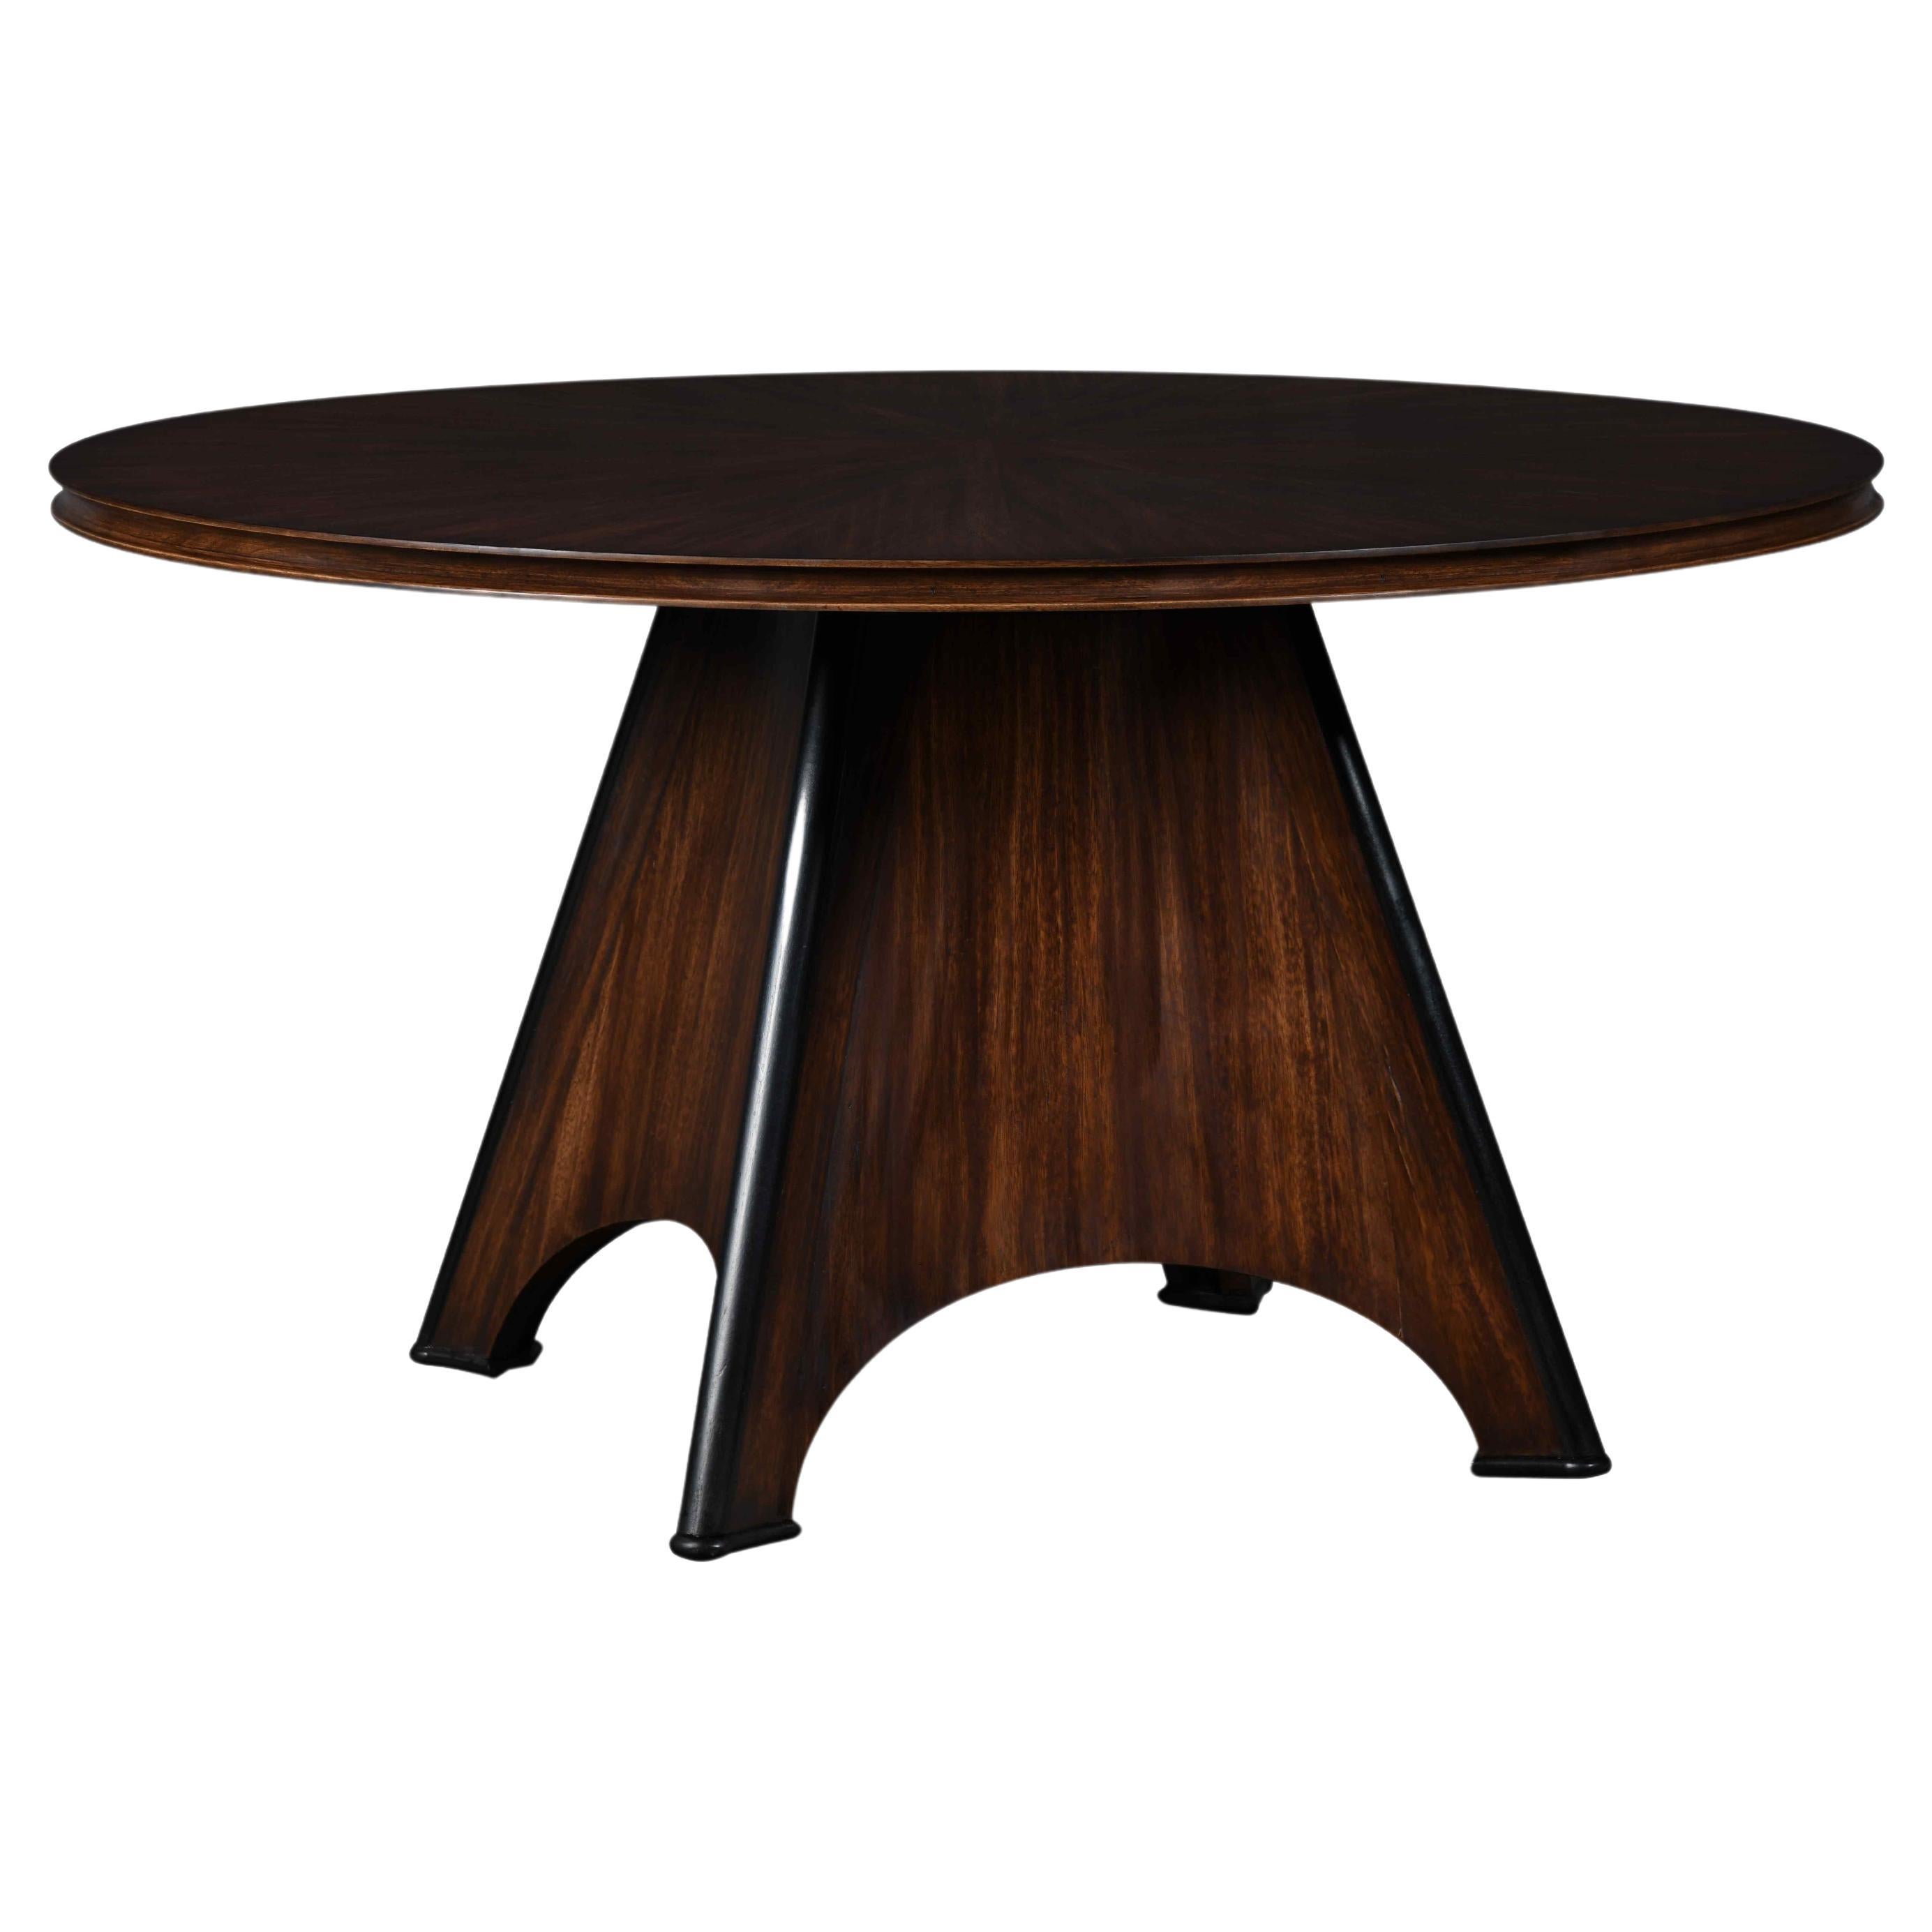 Muret Center Table with a Pyramid-Like Base and Its Curved and Concave Sides For Sale